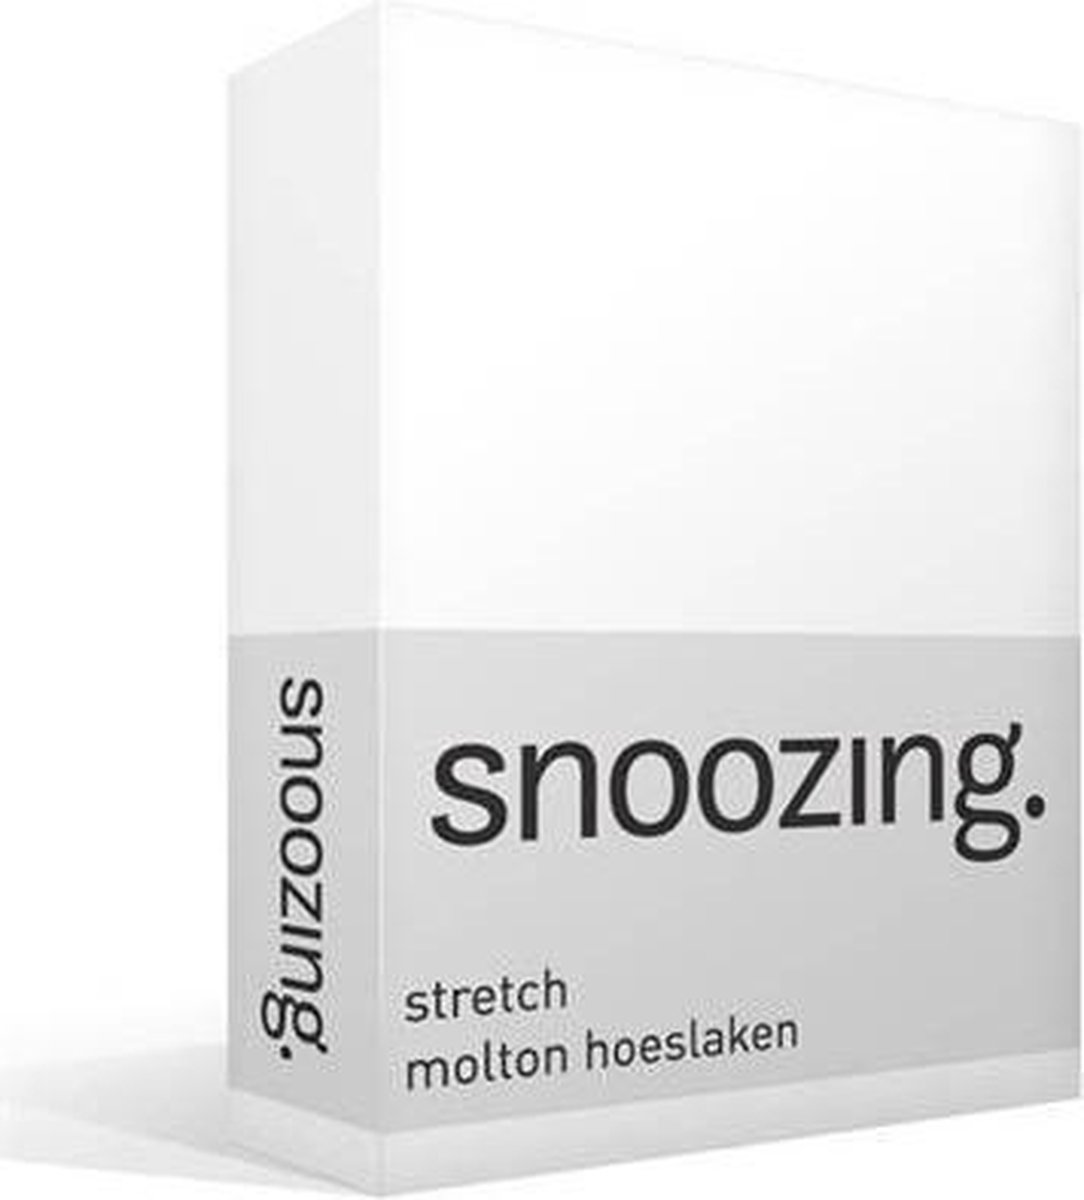 Snoozing Stretch Molton Hoeslaken - 80% Katoen - 20% Polyester - 1-persoons (90x200/220 Of 100x200 Cm) - - Wit